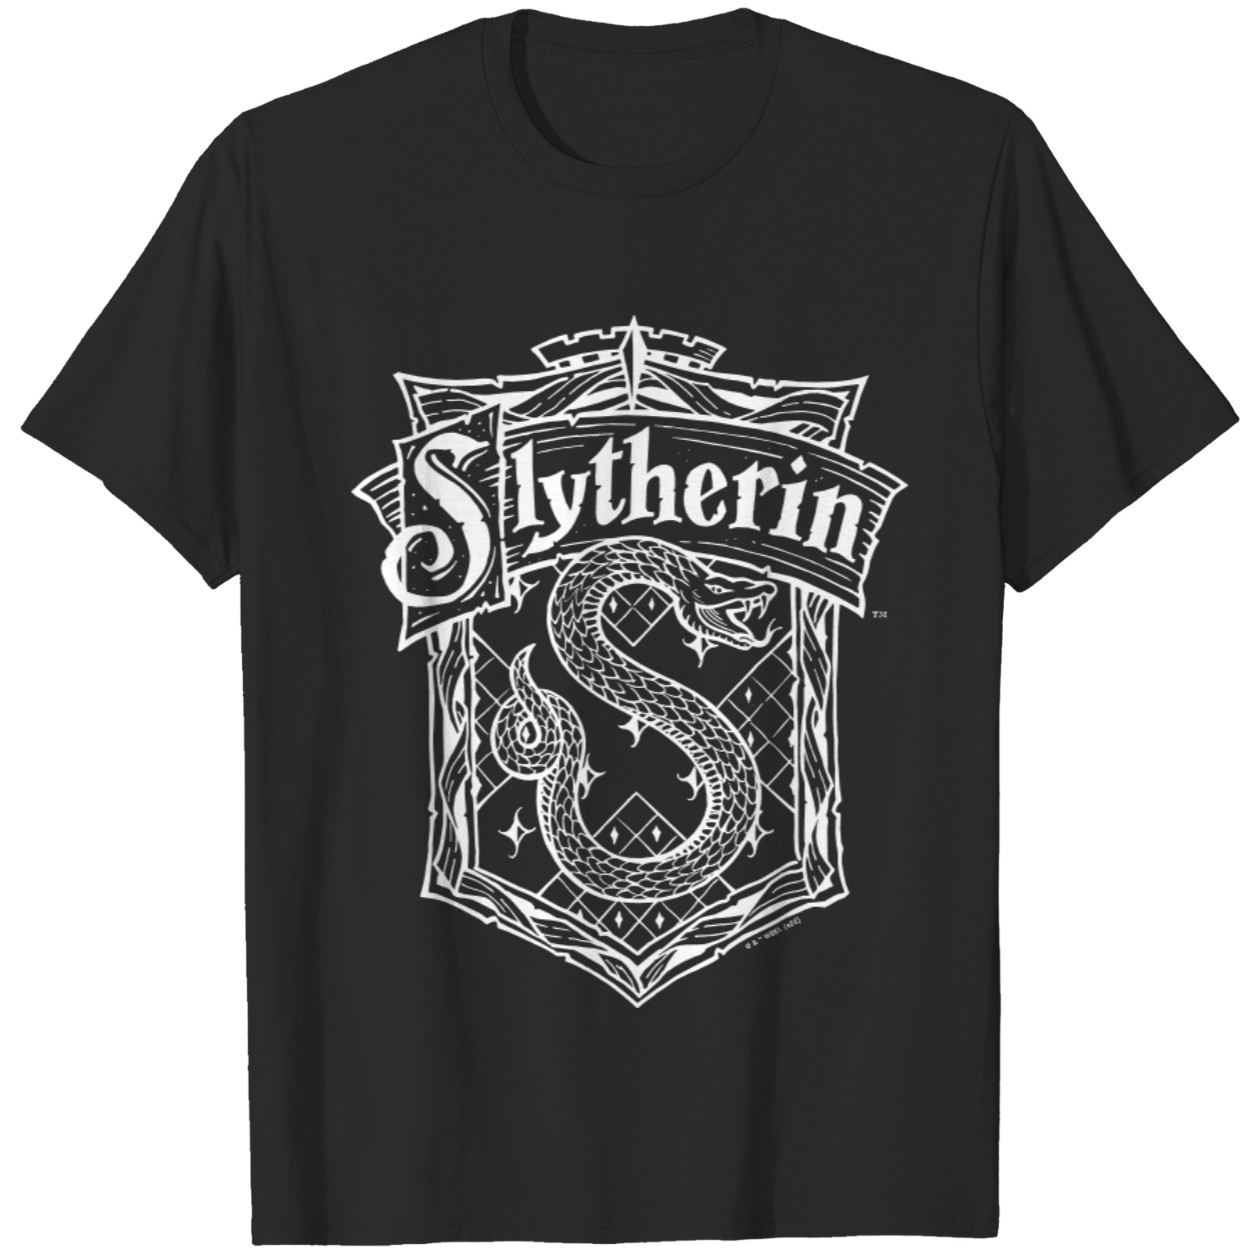 Show Your Loyalty with Slytherin Crest T-Shirt IYT